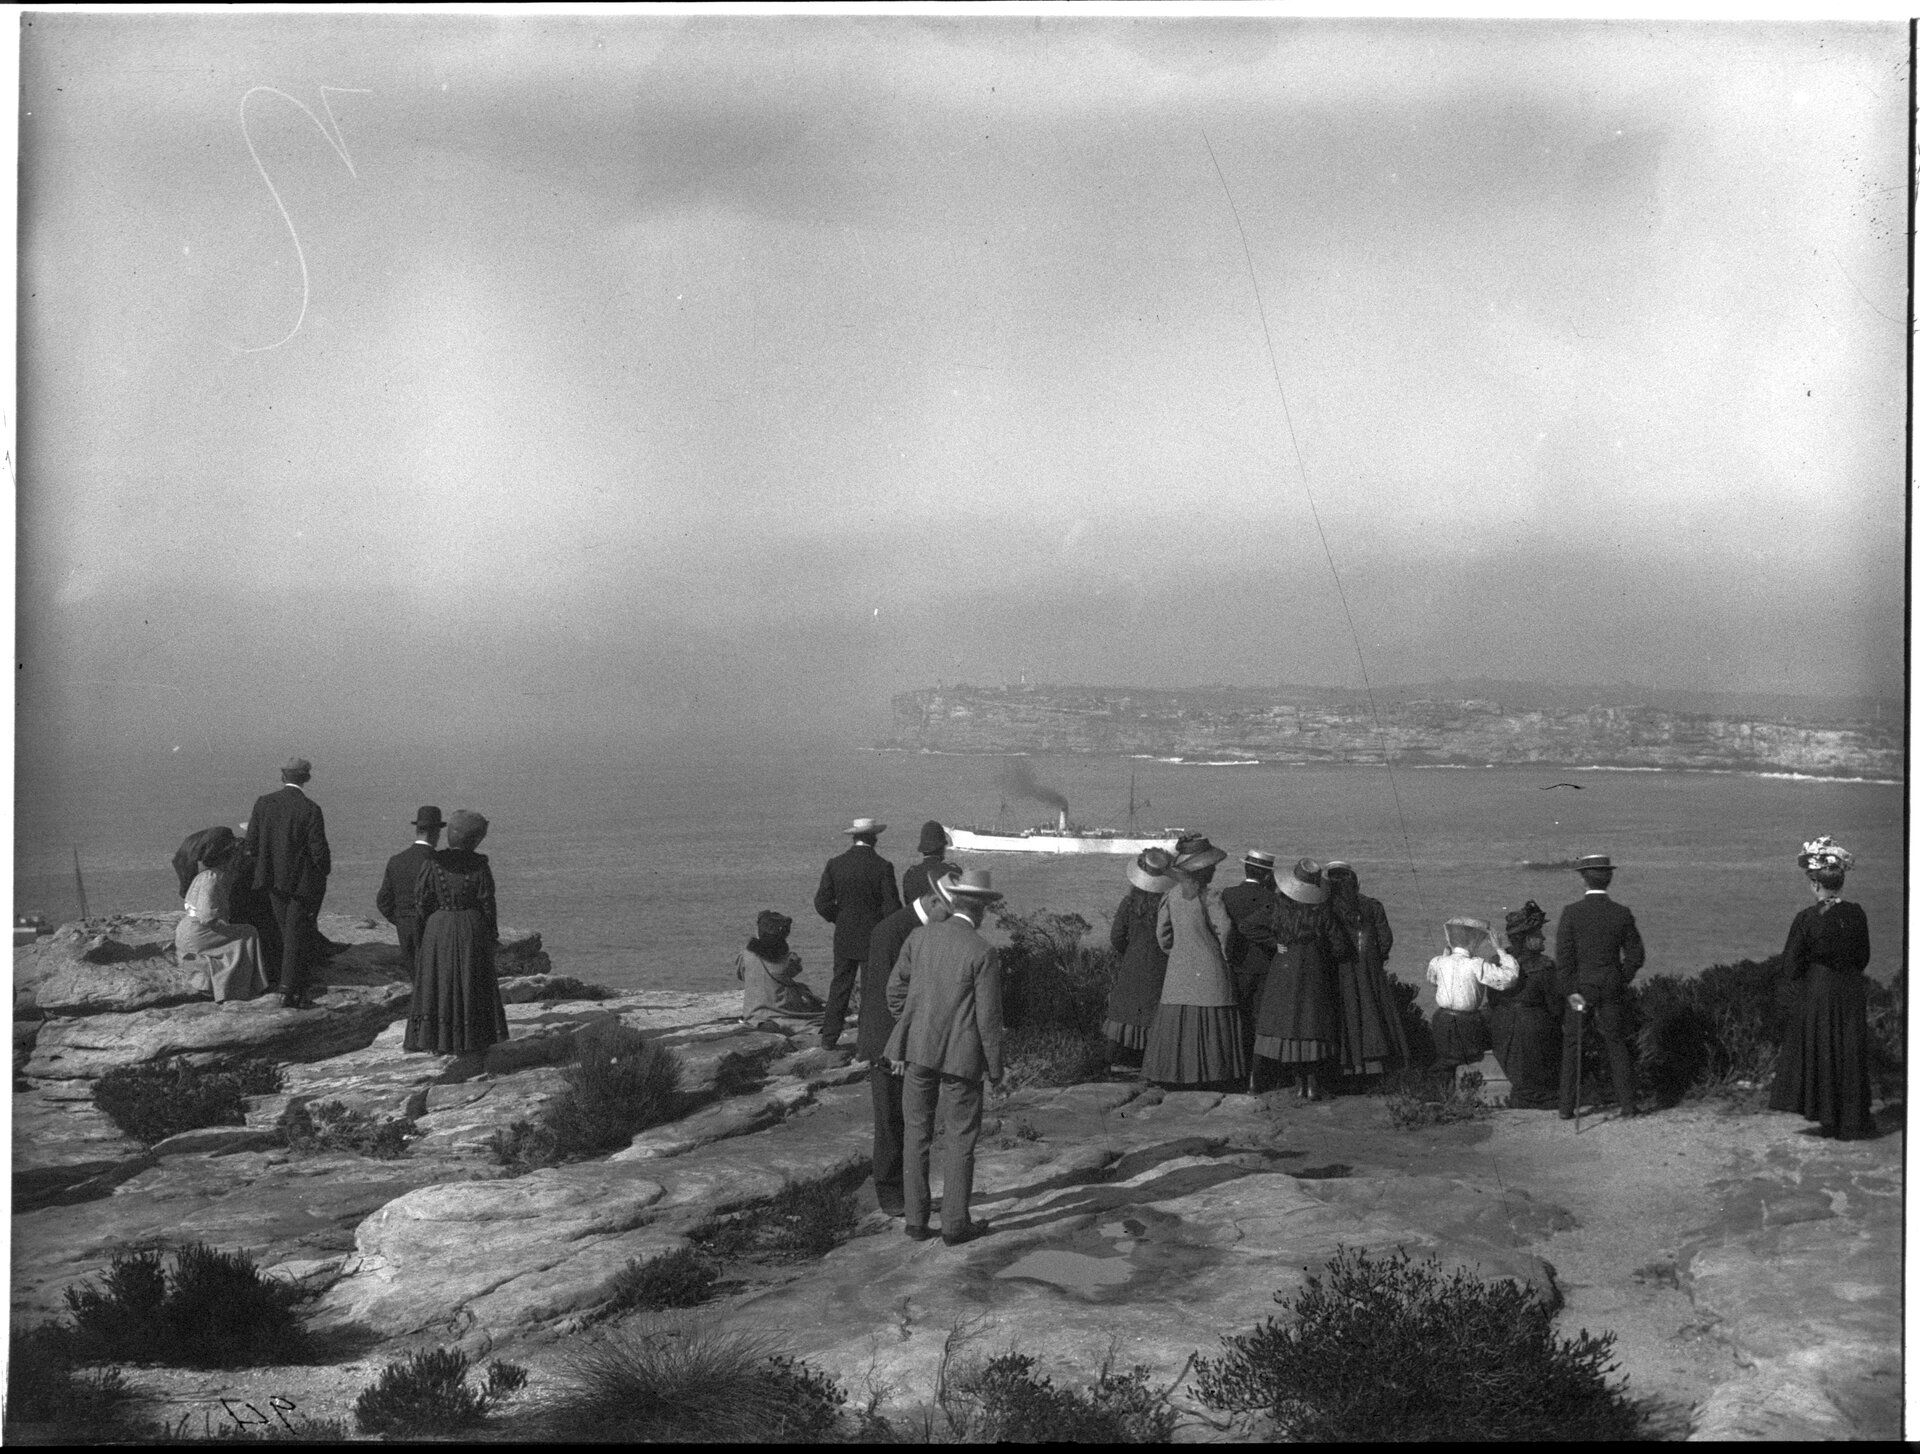  A crowd stand on a harbour clifftop watching a ship depart